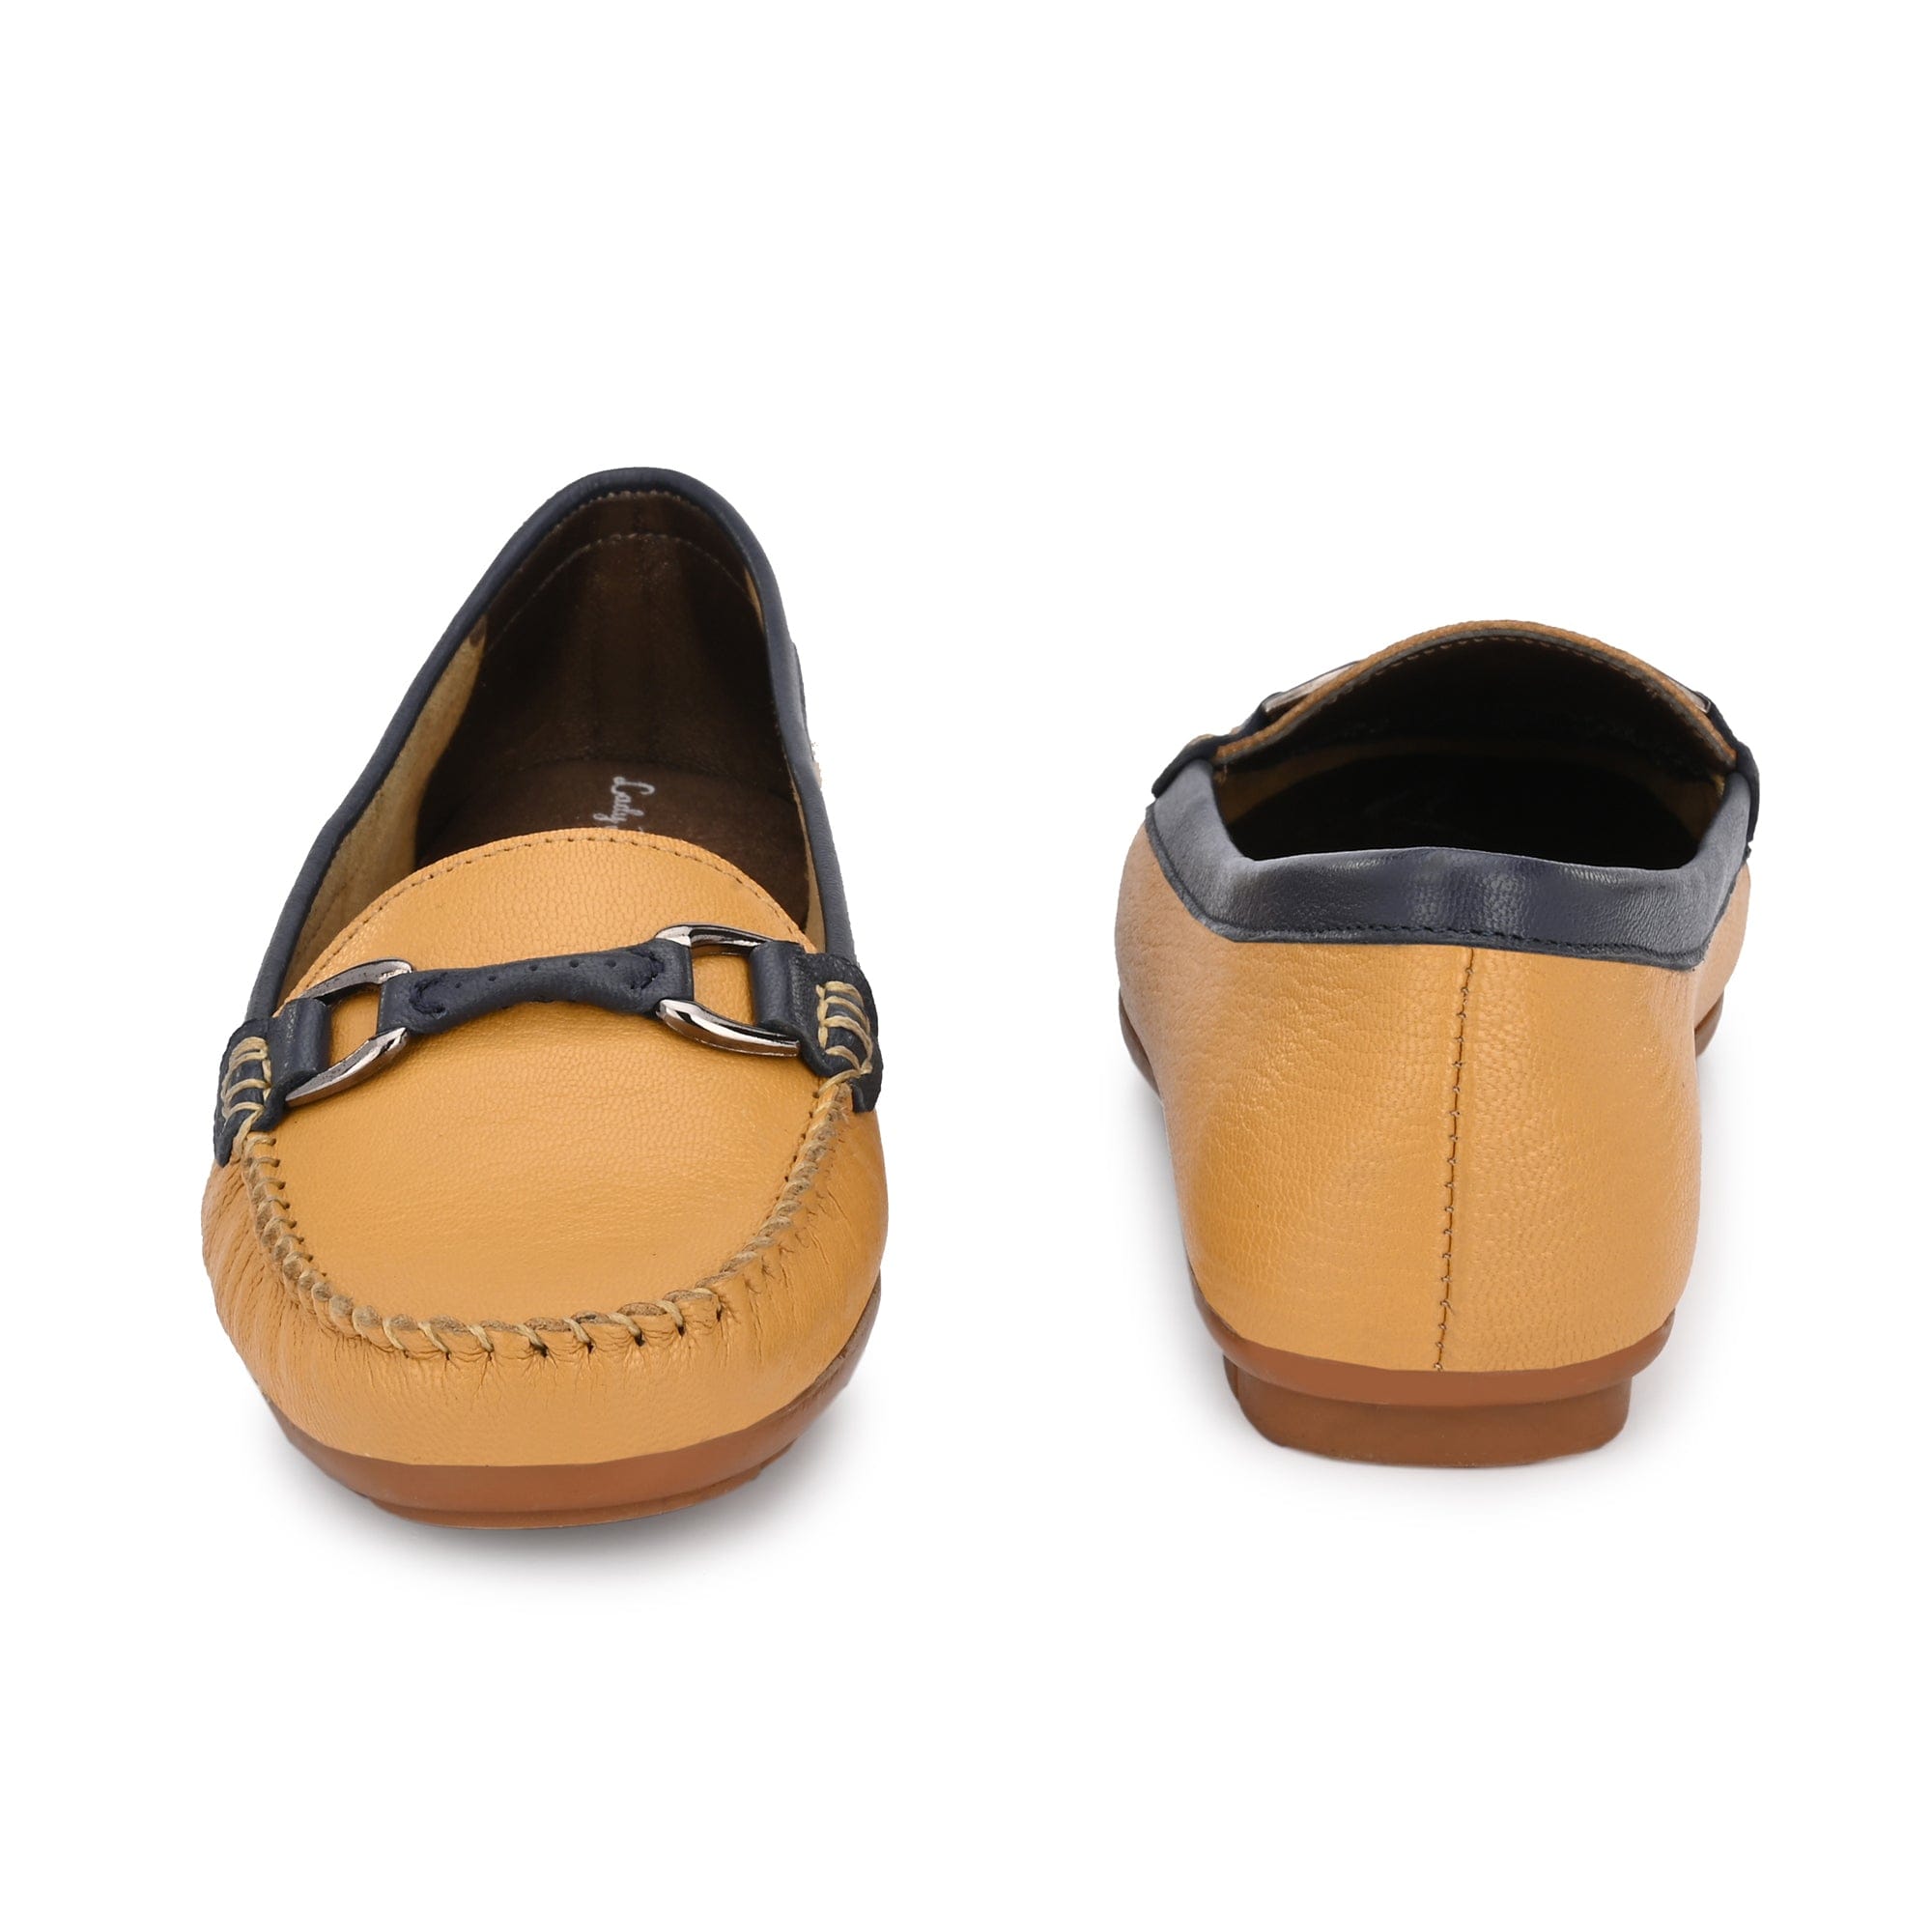 Dual Tone Buckled Loafers For Women egoss-shoes